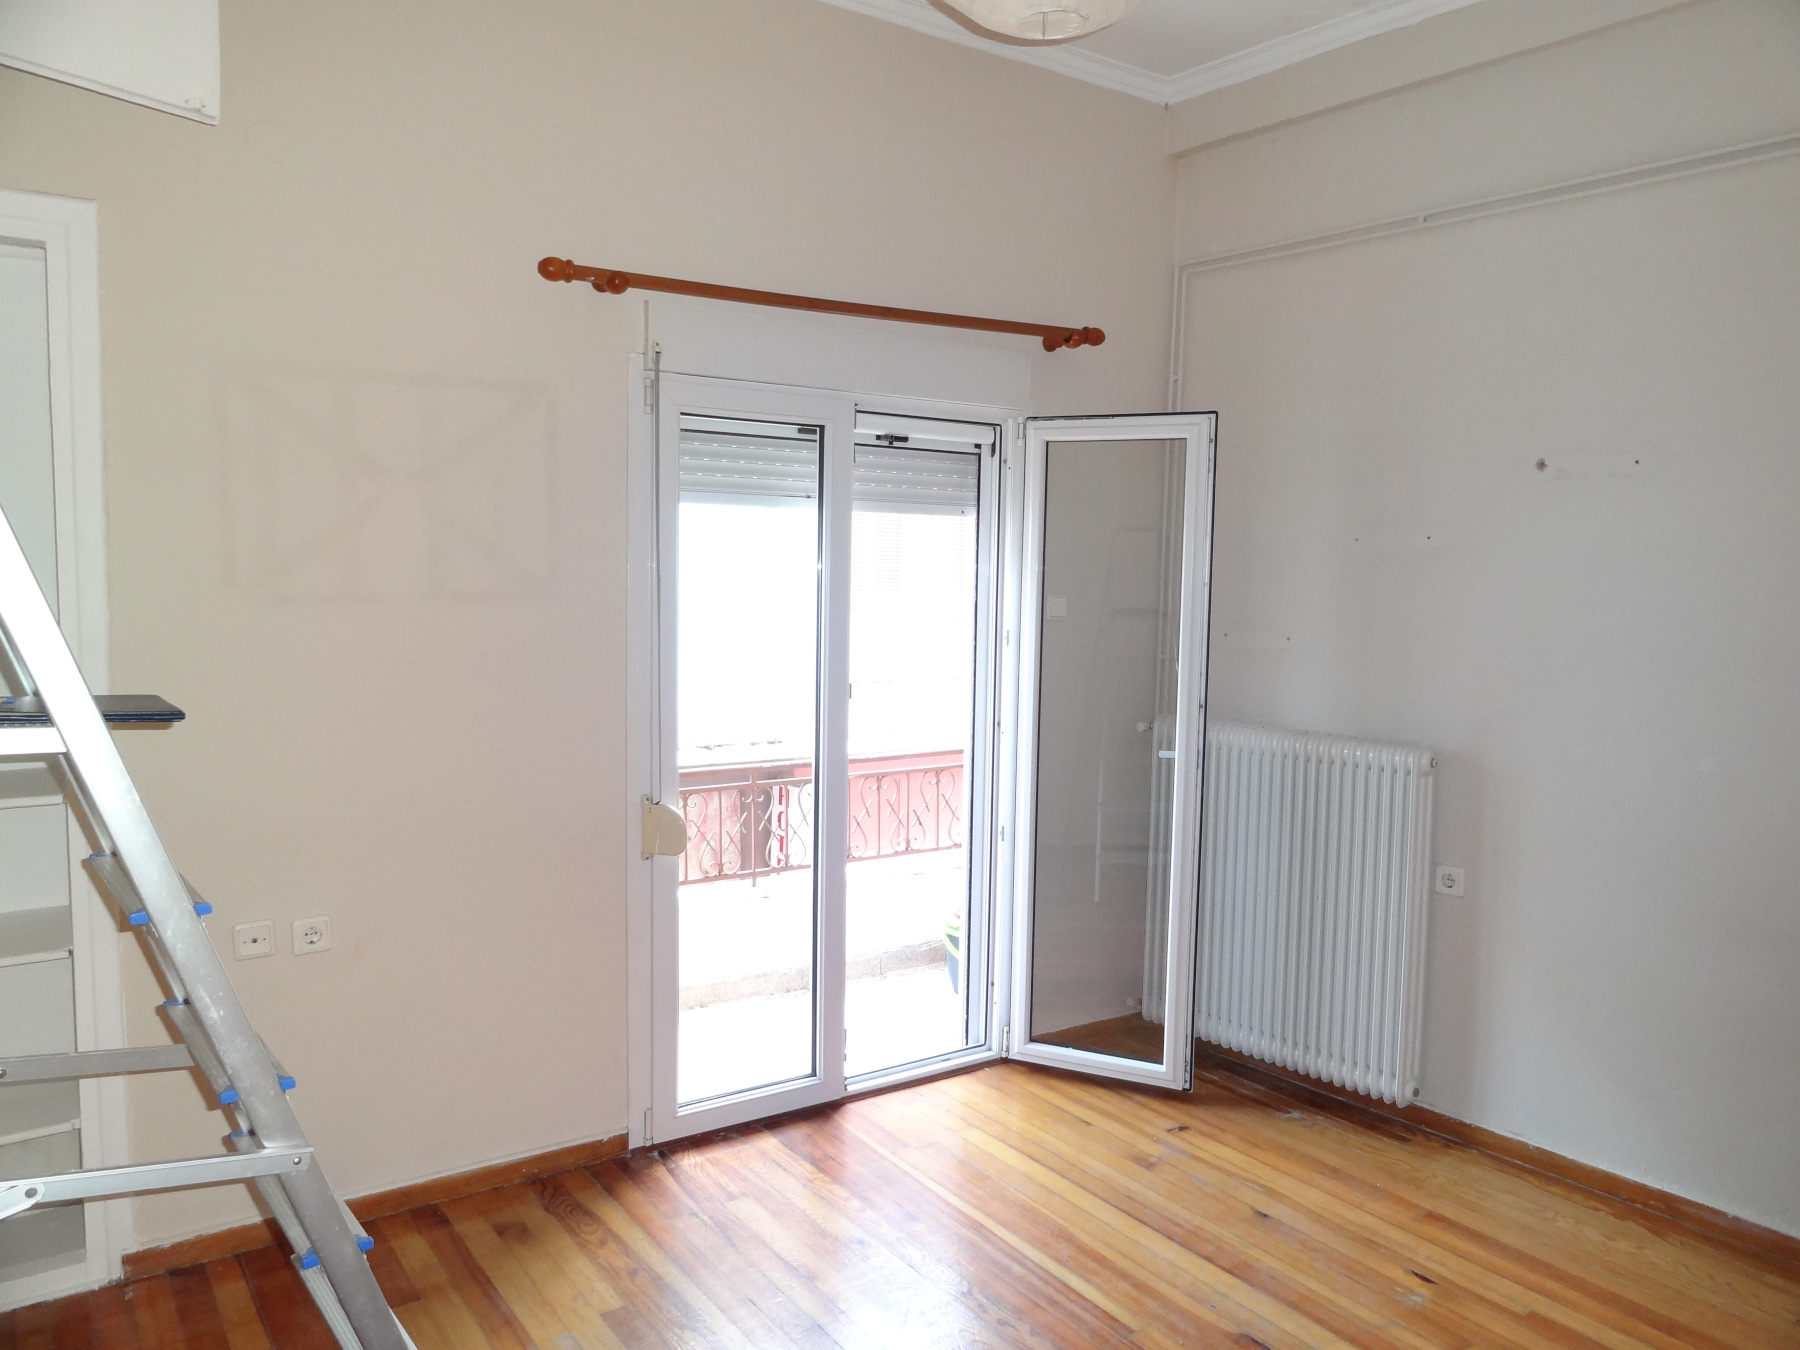 For rent two-rooms studio, 32 sq.m. 1st floor in the area of Molos in Ioannina near Averof